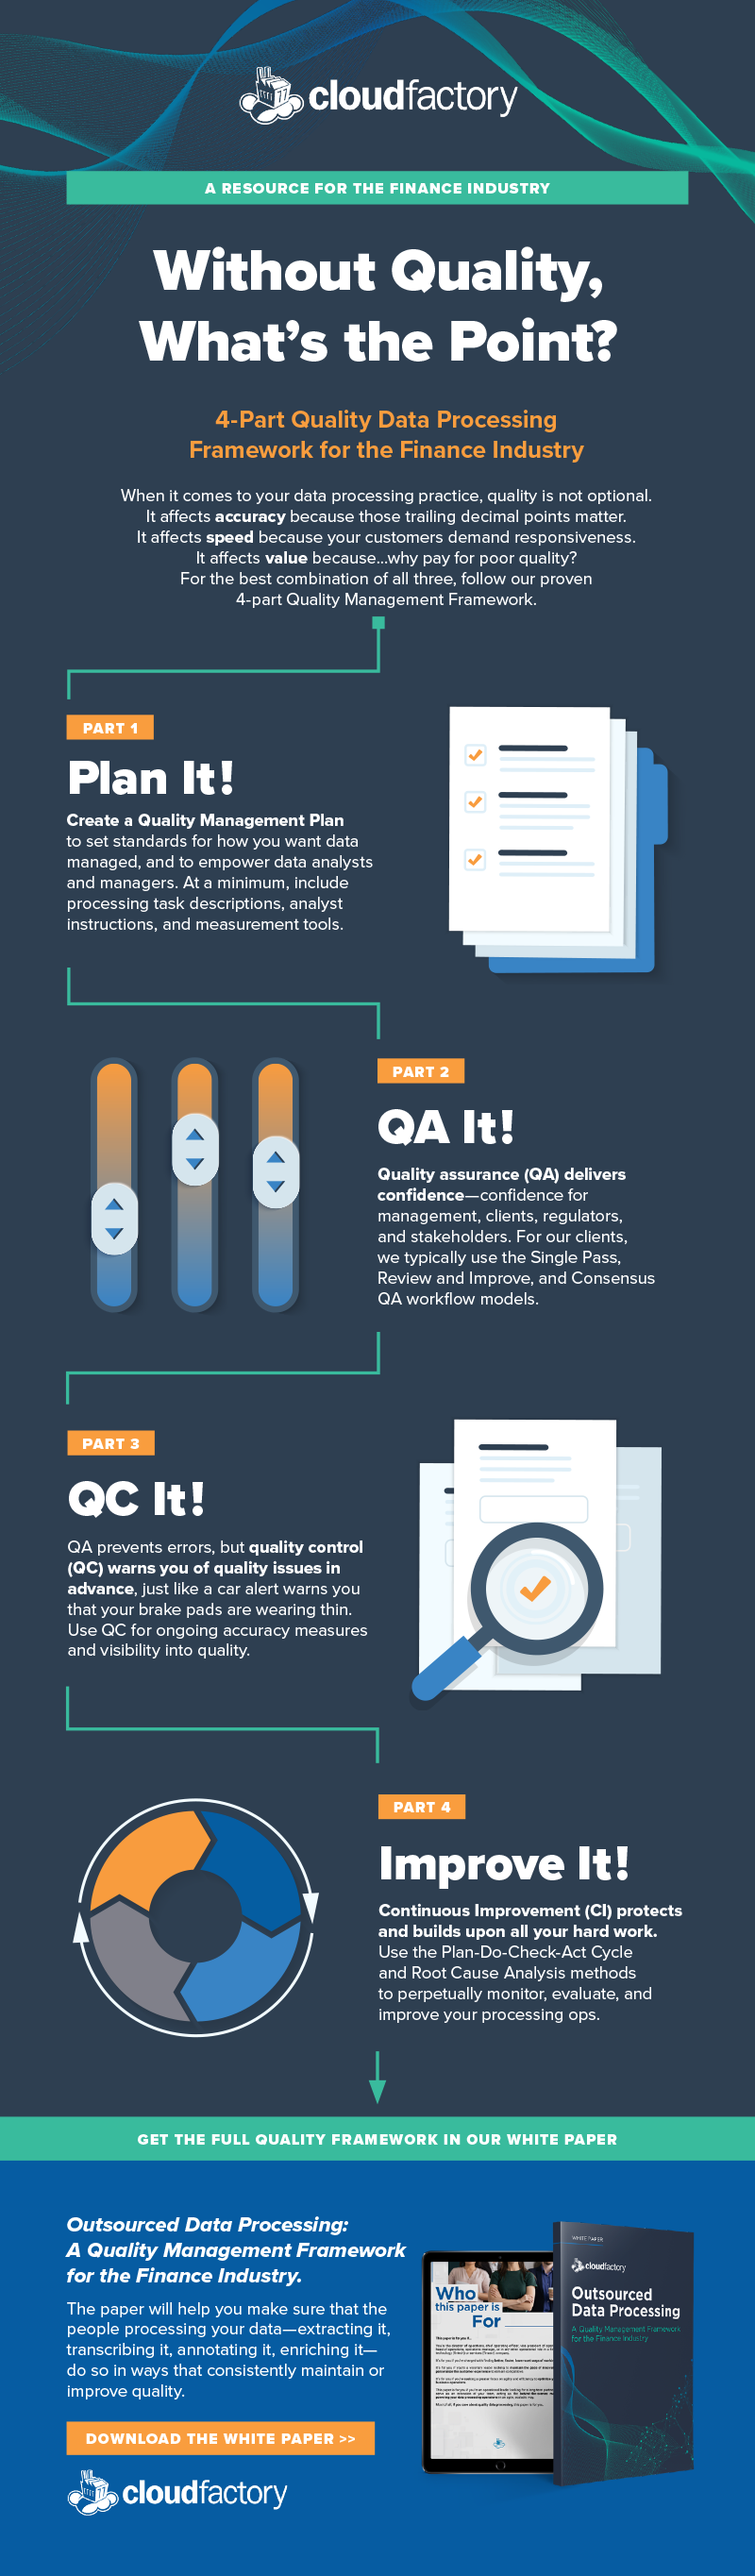 4 Part Quality Data Processing Framework For The Finance Industry infographic